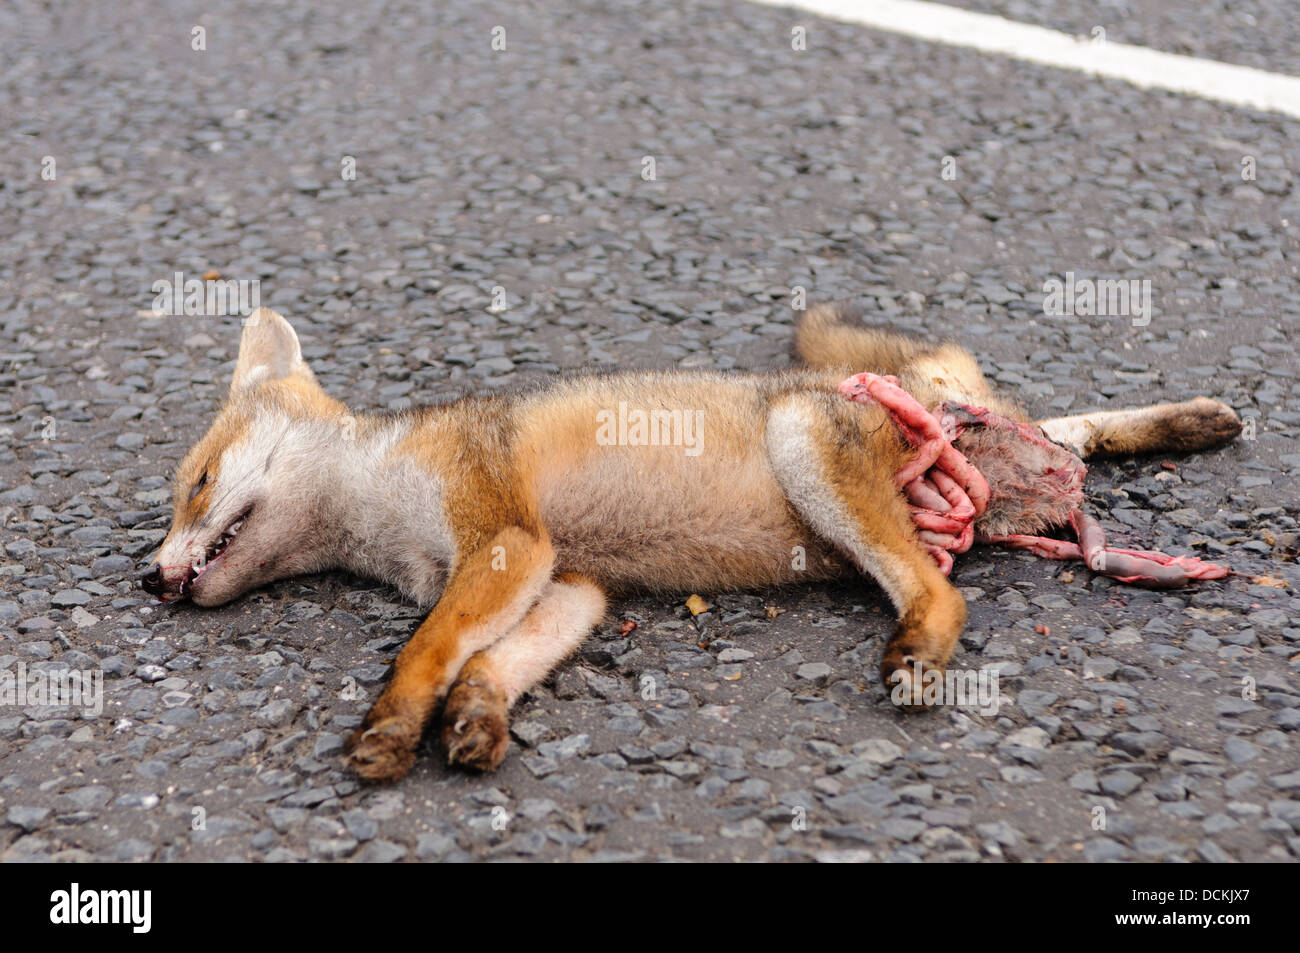 Dead fox roadkill on a rural road with its intestines guts exposed Stock Photo